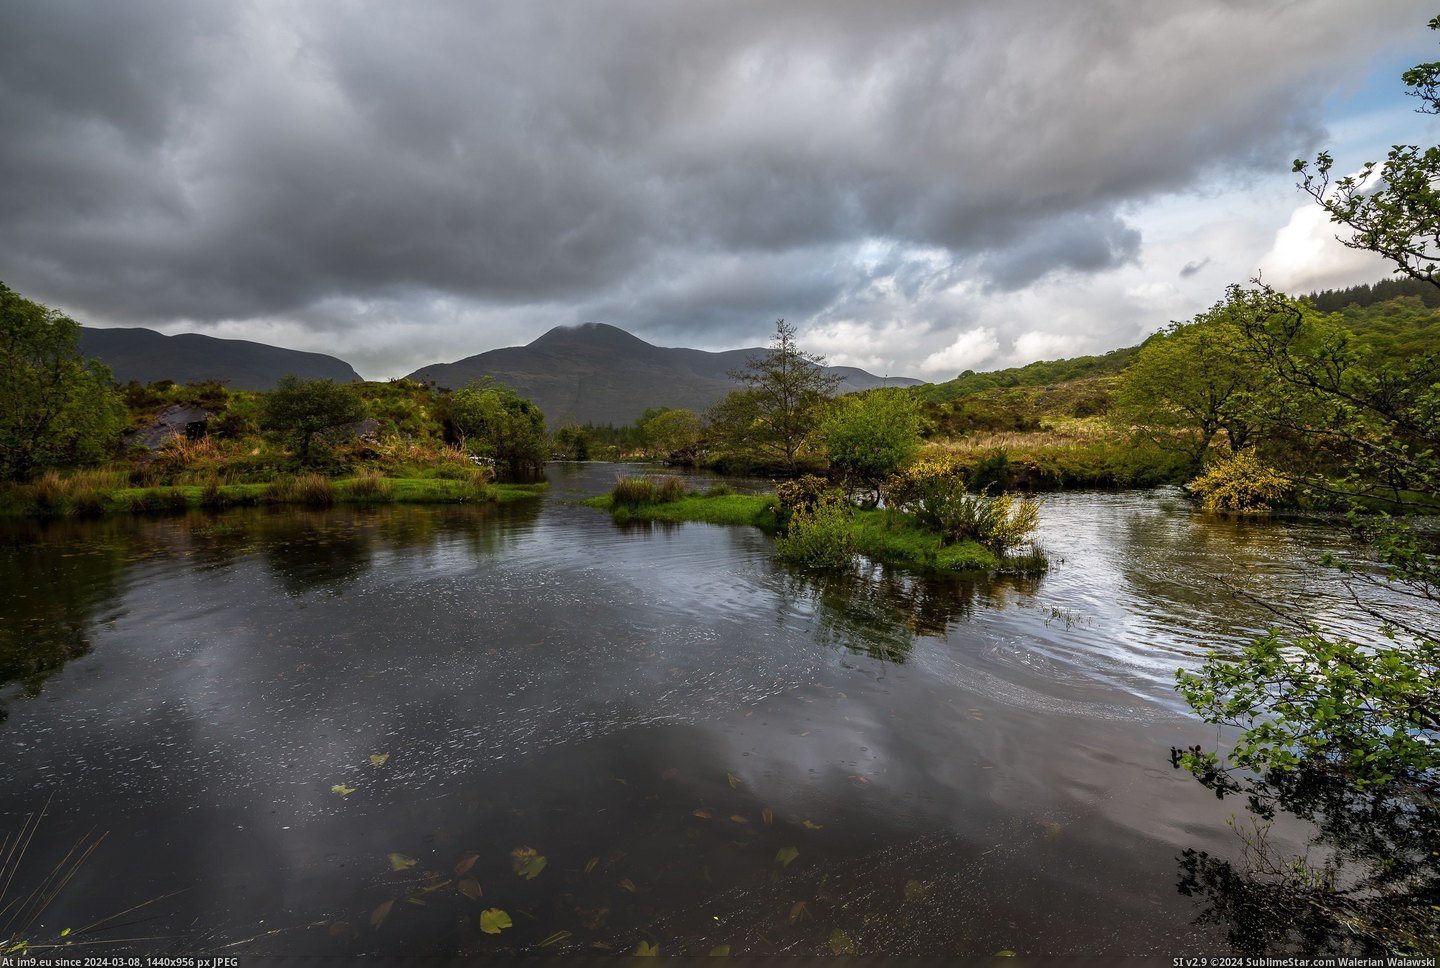 #Black #Small #Ireland #Kerry #Valley #River [Earthporn] A small river through the Black Valley in Kerry, Ireland  (3462x2311) Pic. (Изображение из альбом My r/EARTHPORN favs))